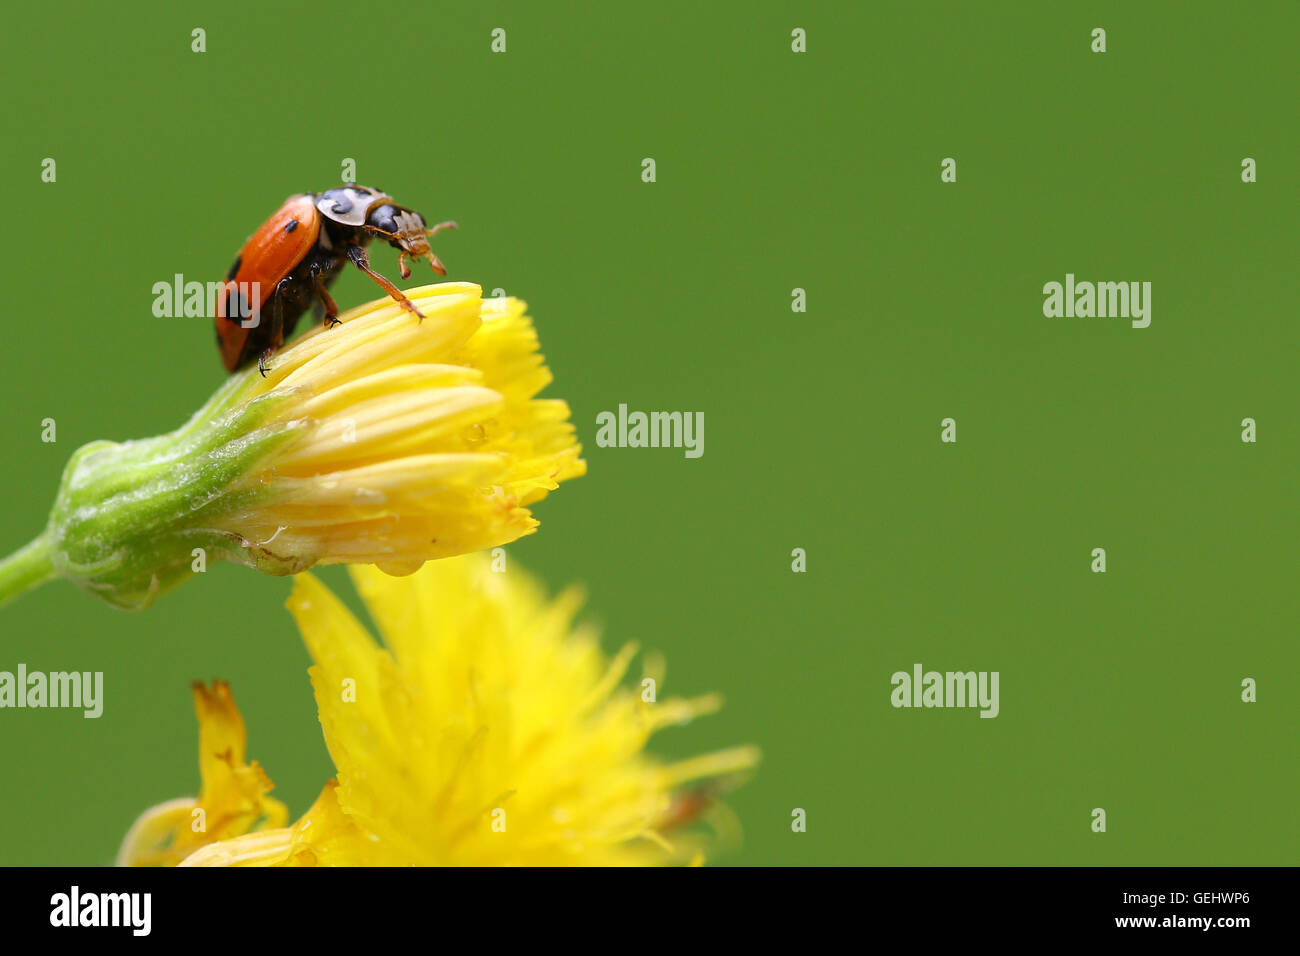 Ladybug on yellow flower against a green background Stock Photo